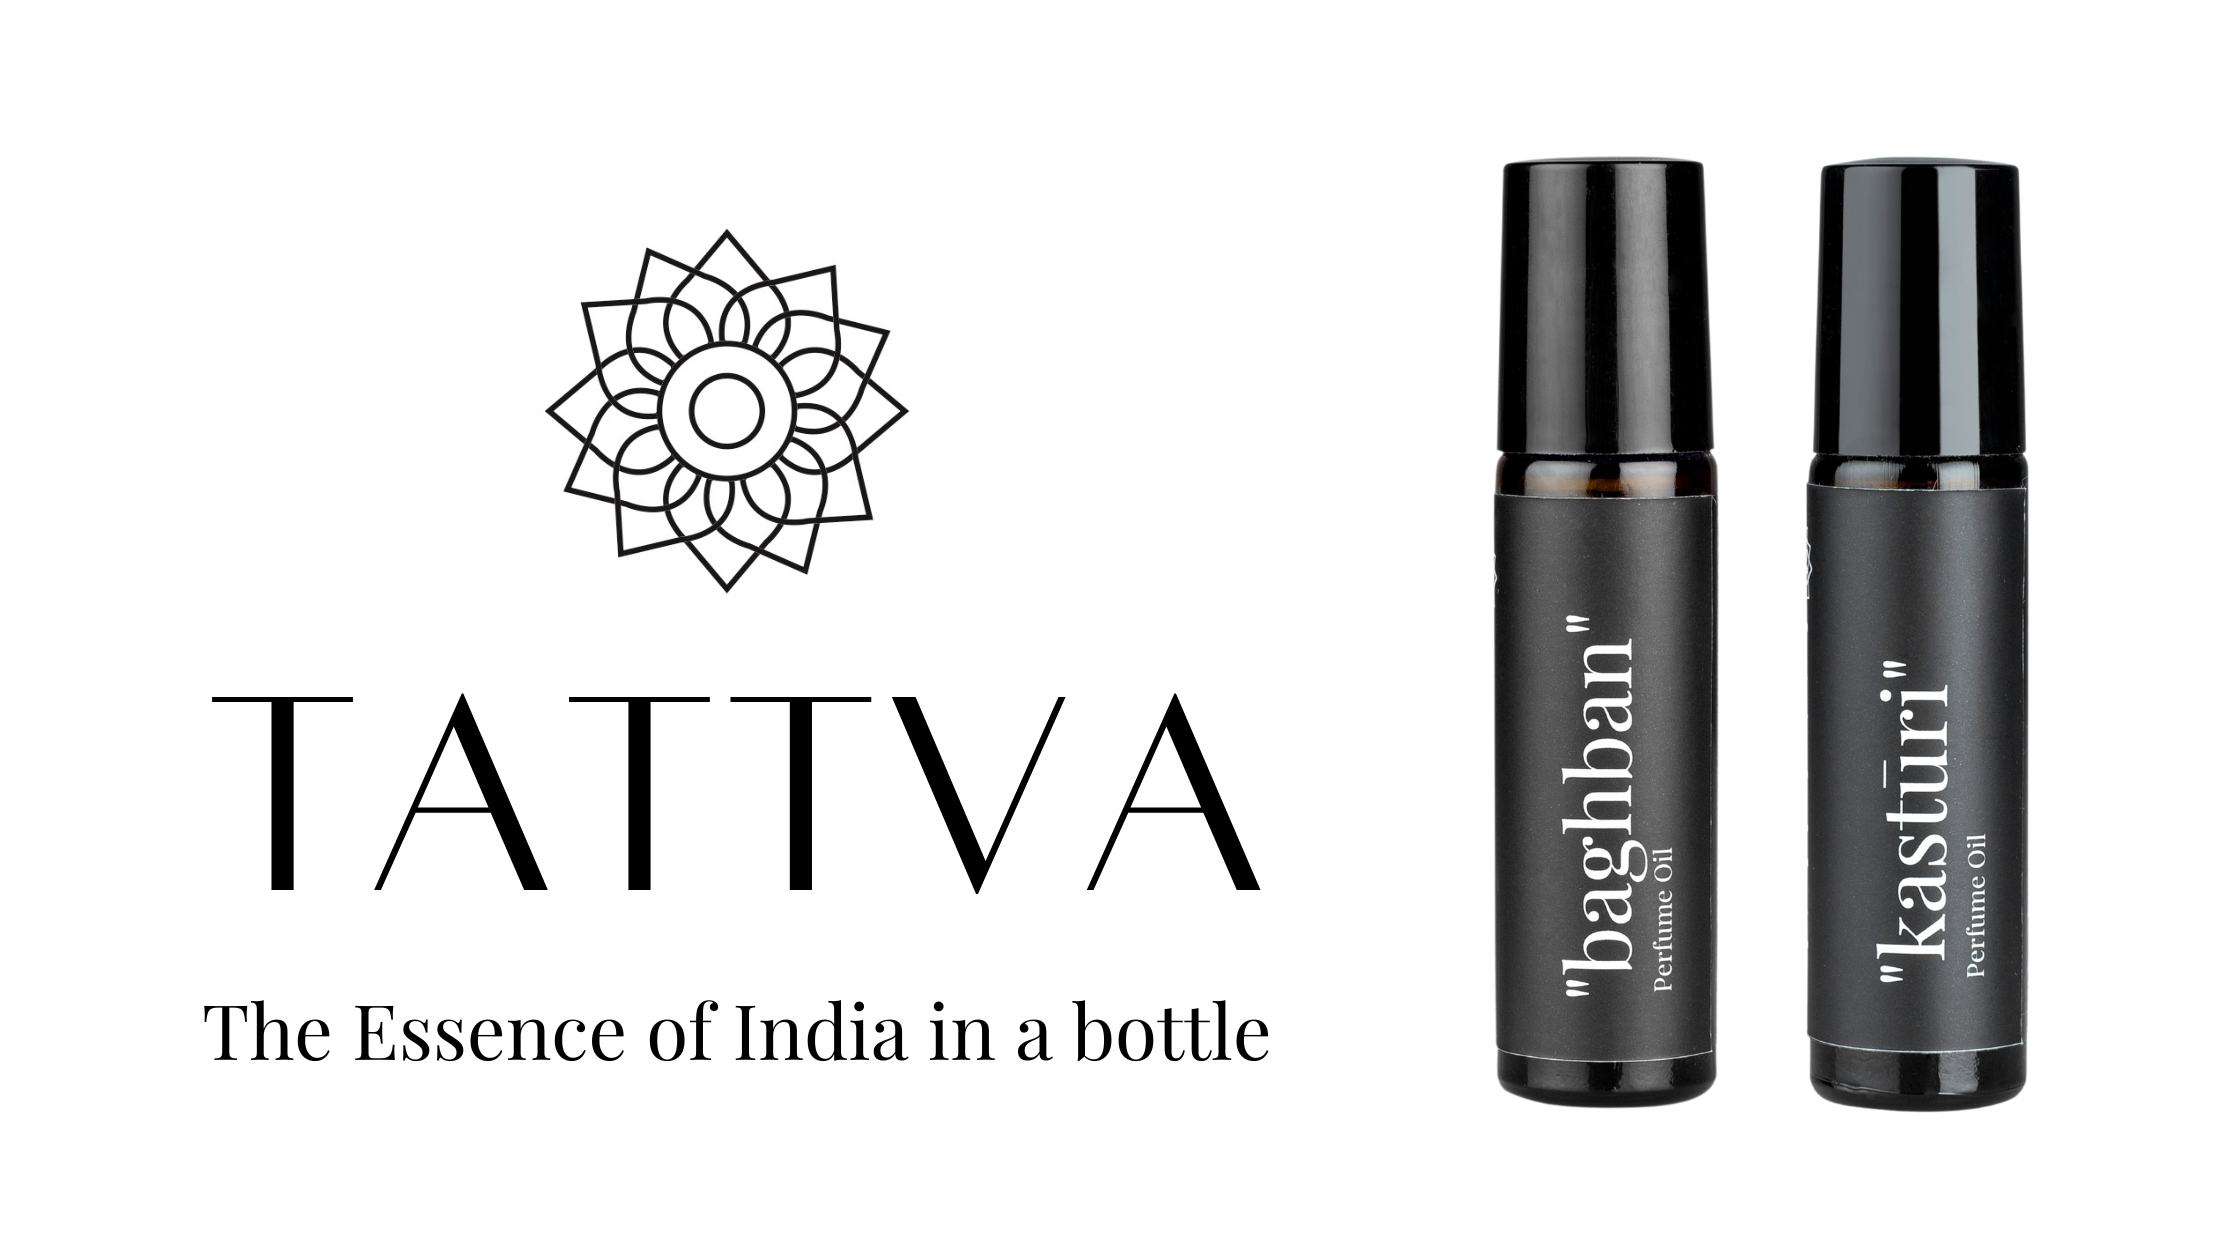 Introducing Tattva Perfumes: The Essence of India in a Bottle